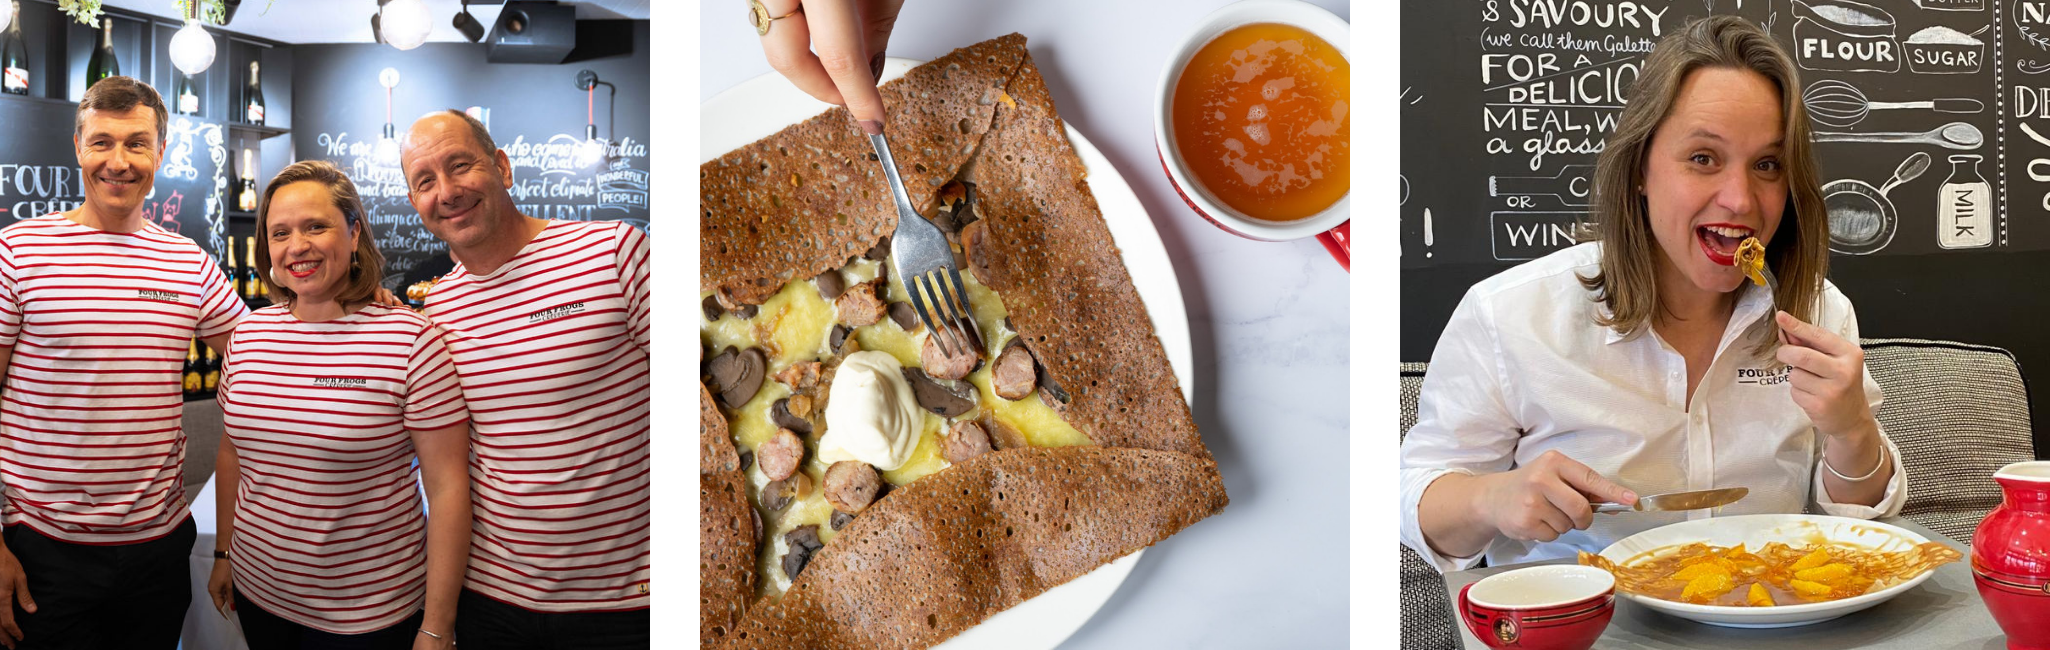 Four Frogs Crêperie about us page banner made of a photo of the 3 owners, Marianne Poirey, Laurent and Alex a photo of our la Bretonne Galette and of Marianne eating a Crêpe Suzette